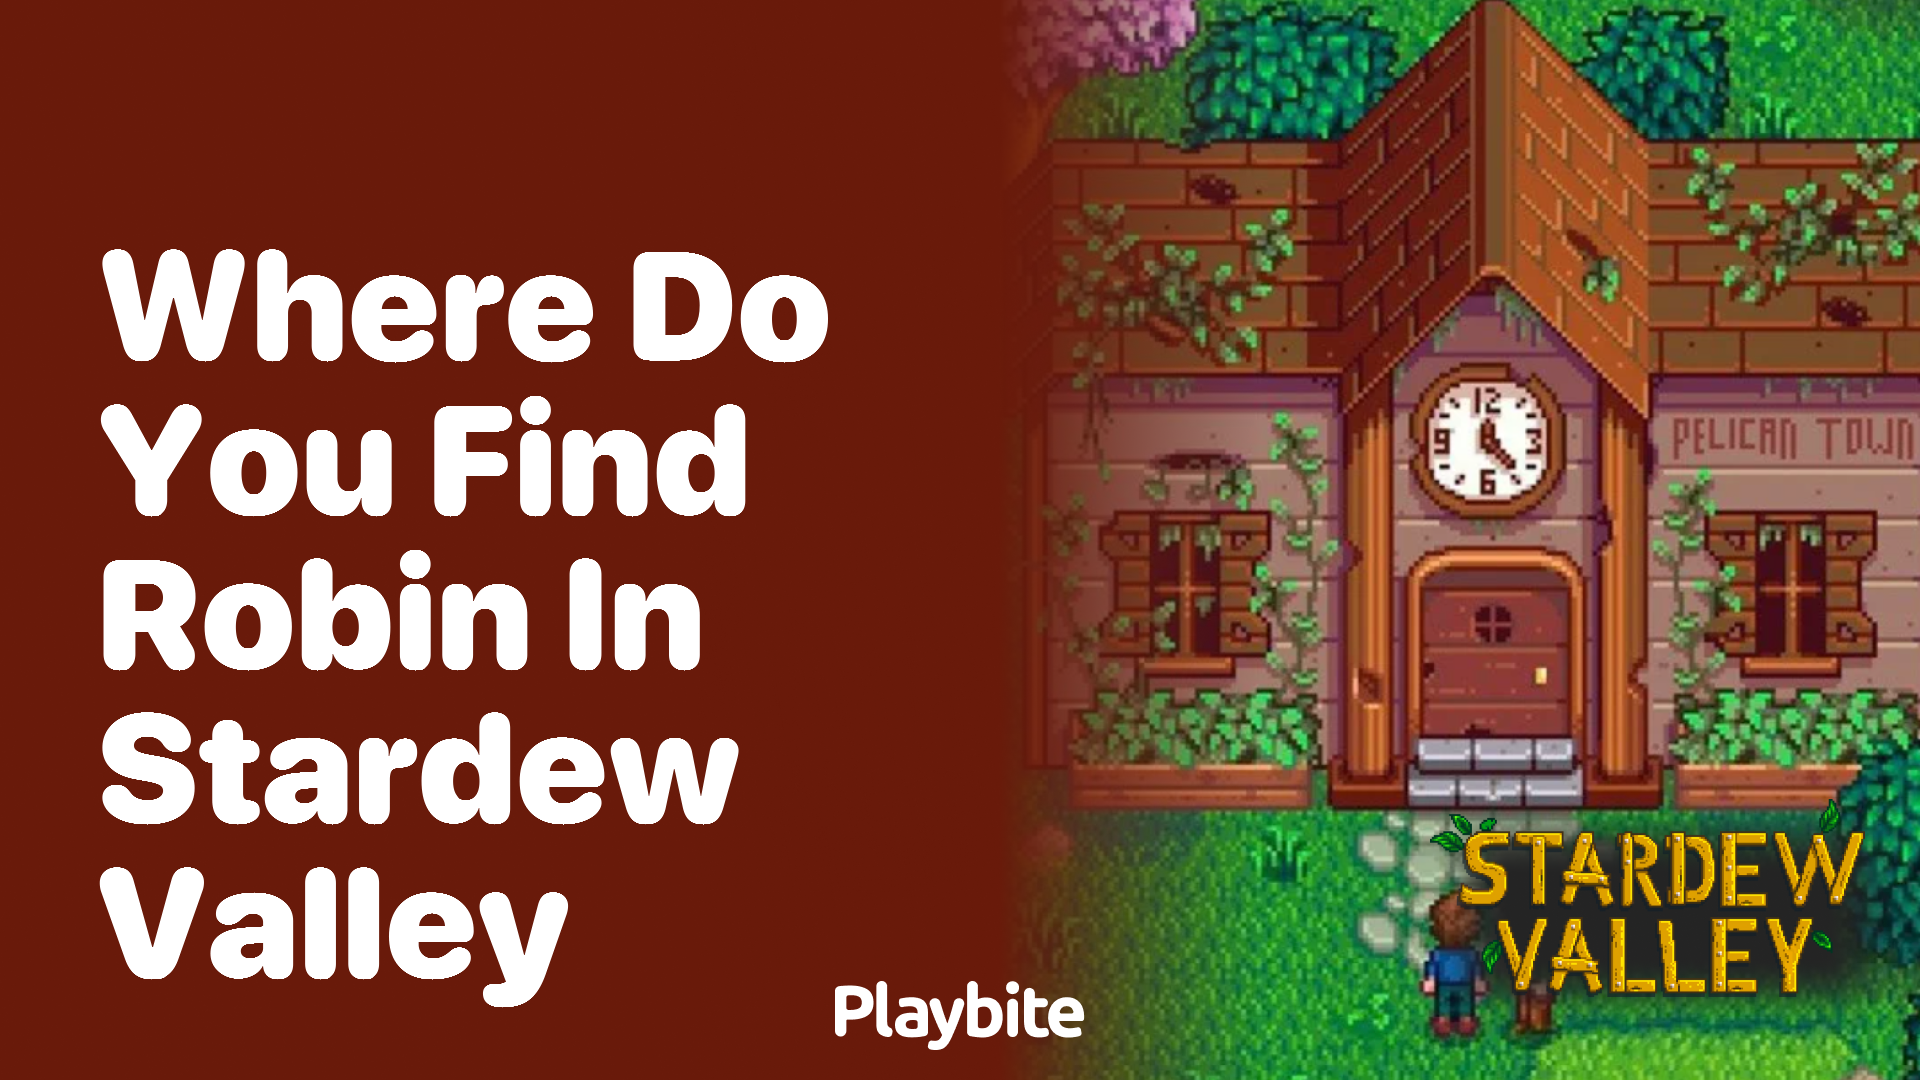 Where Do You Find Robin in Stardew Valley?